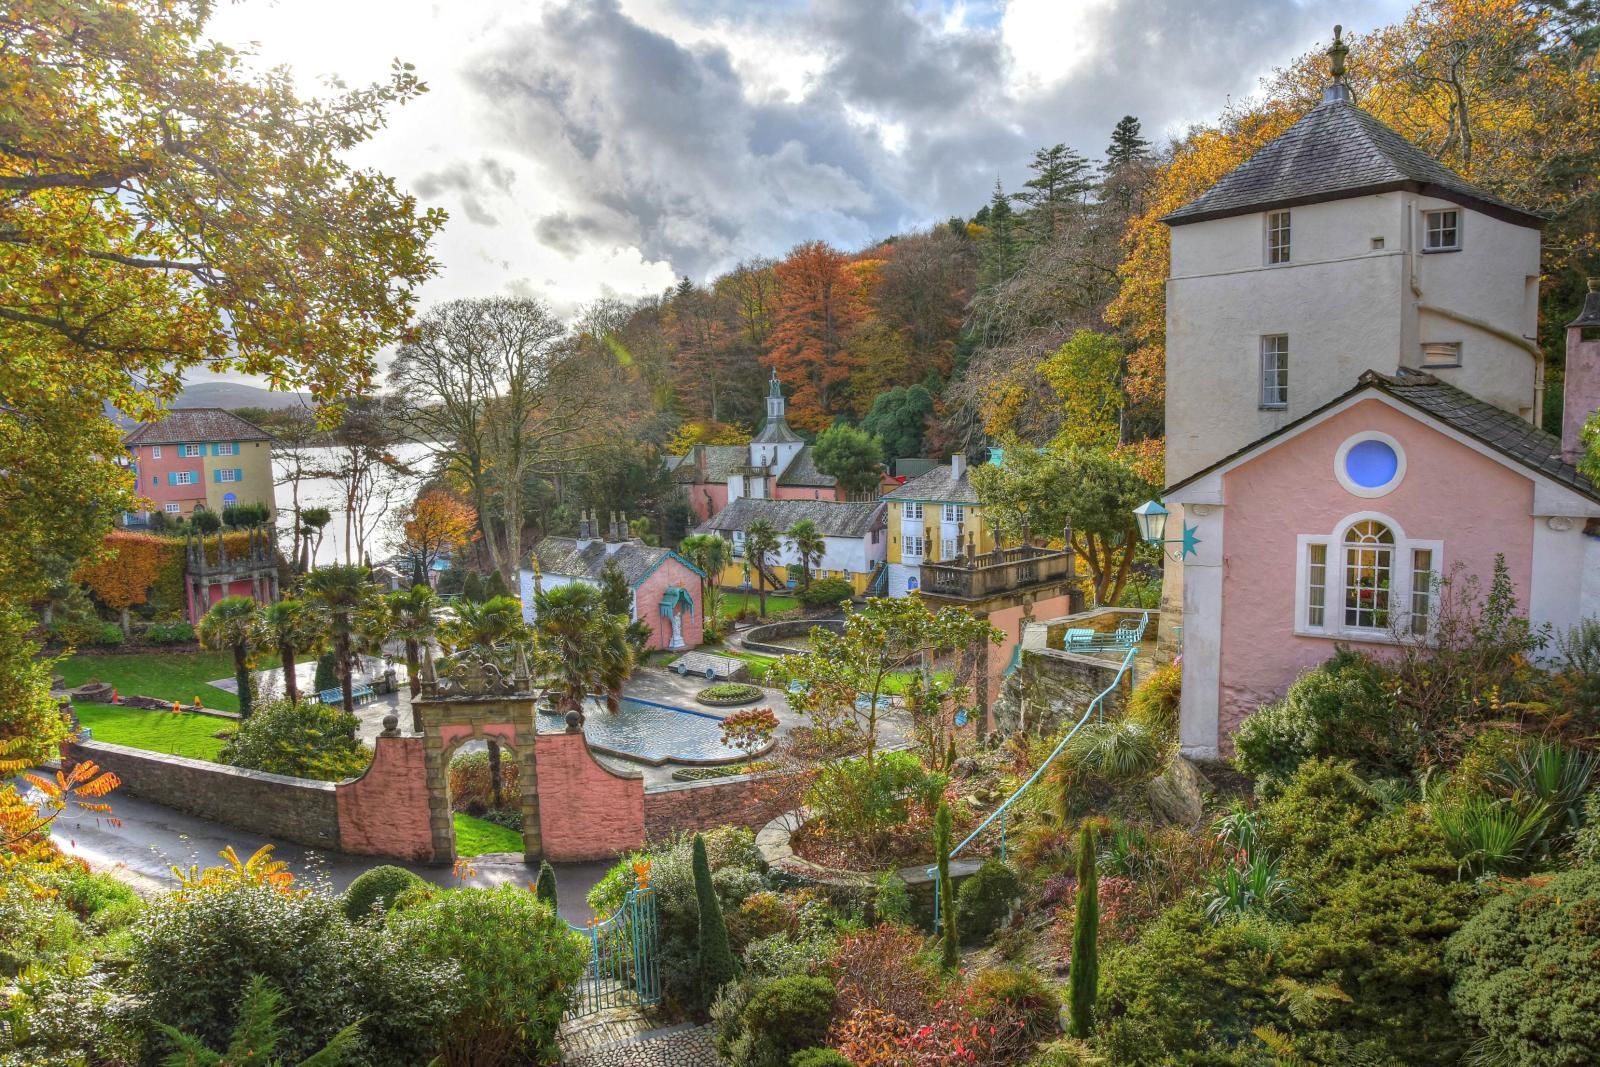 The Village Things To Do Portmeirion North Wales